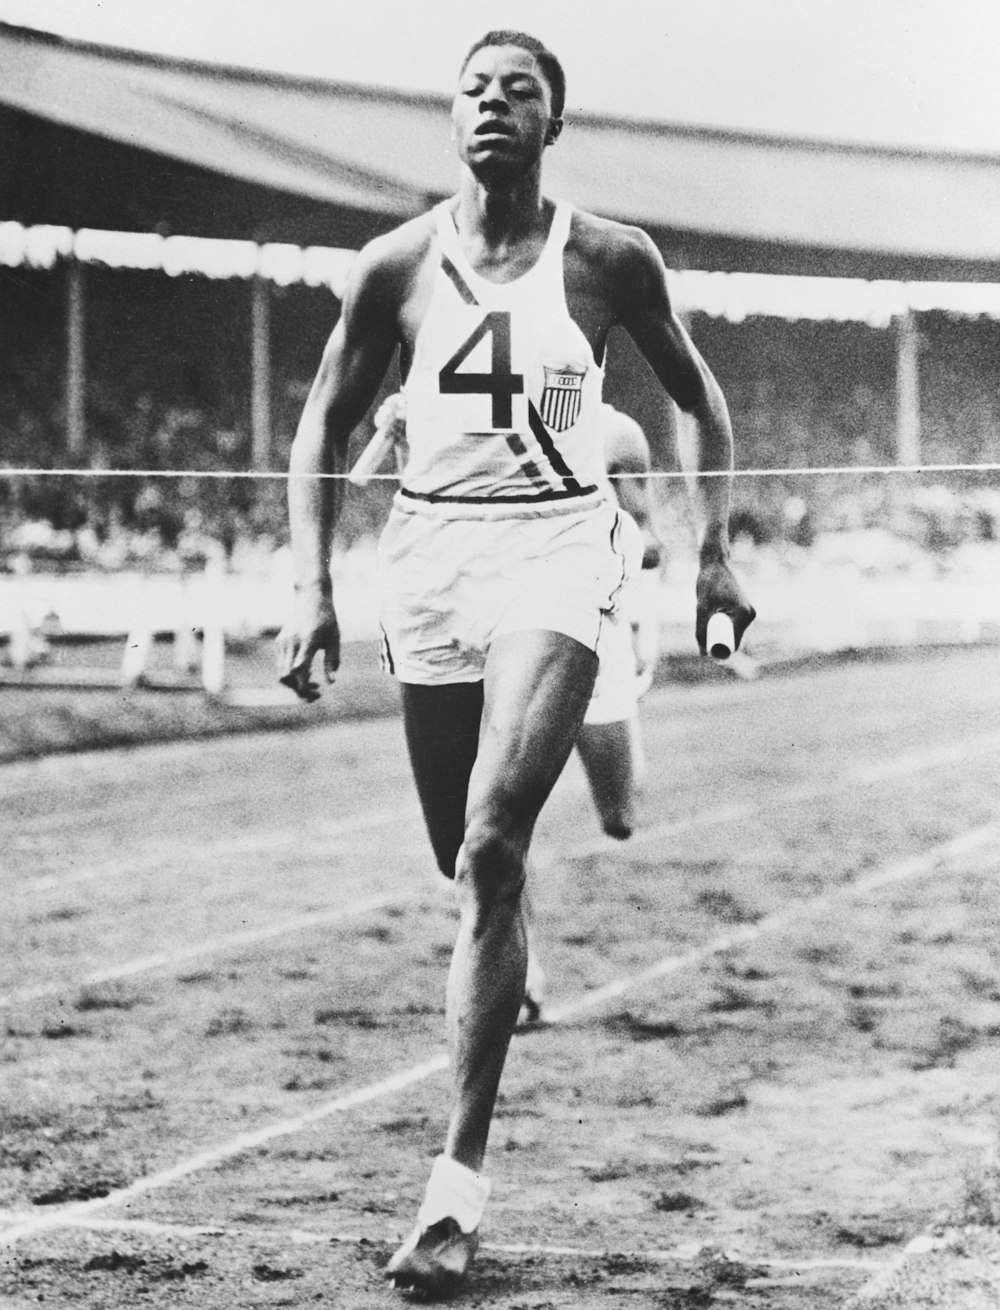 John Woodruff #4 running in the two mile relay race at the Olympics, 1936 August 15.